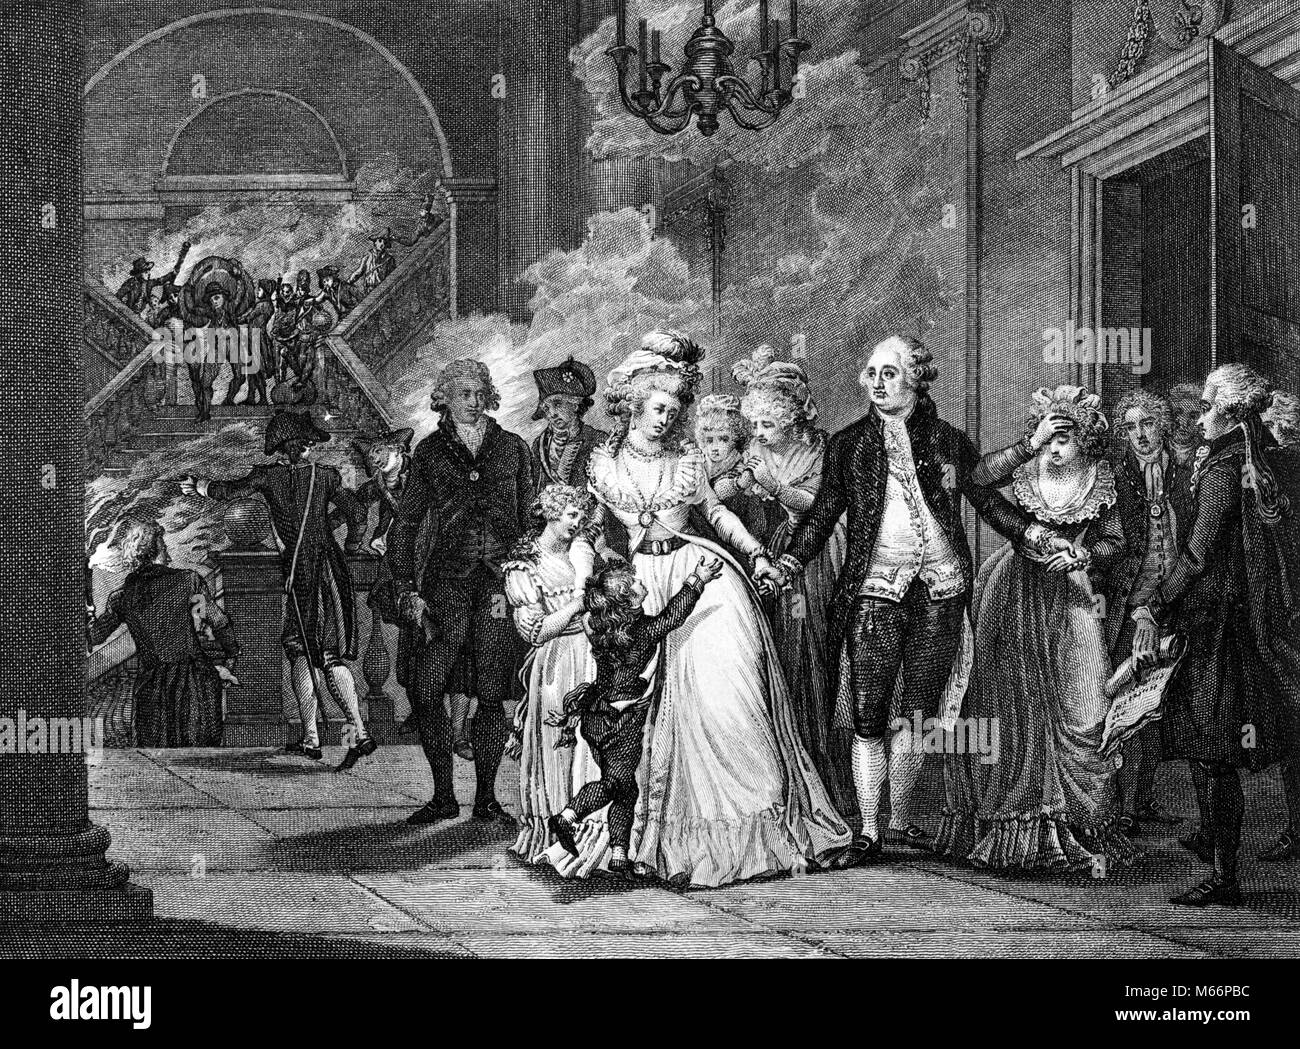 1700s KING LOUIS XVI BIDS FAREWELL FAMILY & MARIE ANTOINETTE BEFORE BEING LED TO GUILLOTINE FRENCH REVOLUTION JANUARY 21 1793 - q68017 CPC001 HARS MONARCH ONE PERSON WITH OTHERS FAREWELL REBELLION EXECUTION LED MALES MID-ADULT MID-ADULT MAN MID-ADULT WOMAN ROYAL FAMILY 1700s 1793 18TH CENTURY ANTOINETTE B&W BIDS BLACK AND WHITE FAMOUS PERSON FRENCH REVOLUTION GUILLOTINE JANUARY 21 LOUIS XVI MARIE OCCUPATIONS PERSONALITIES PERSONS Stock Photo